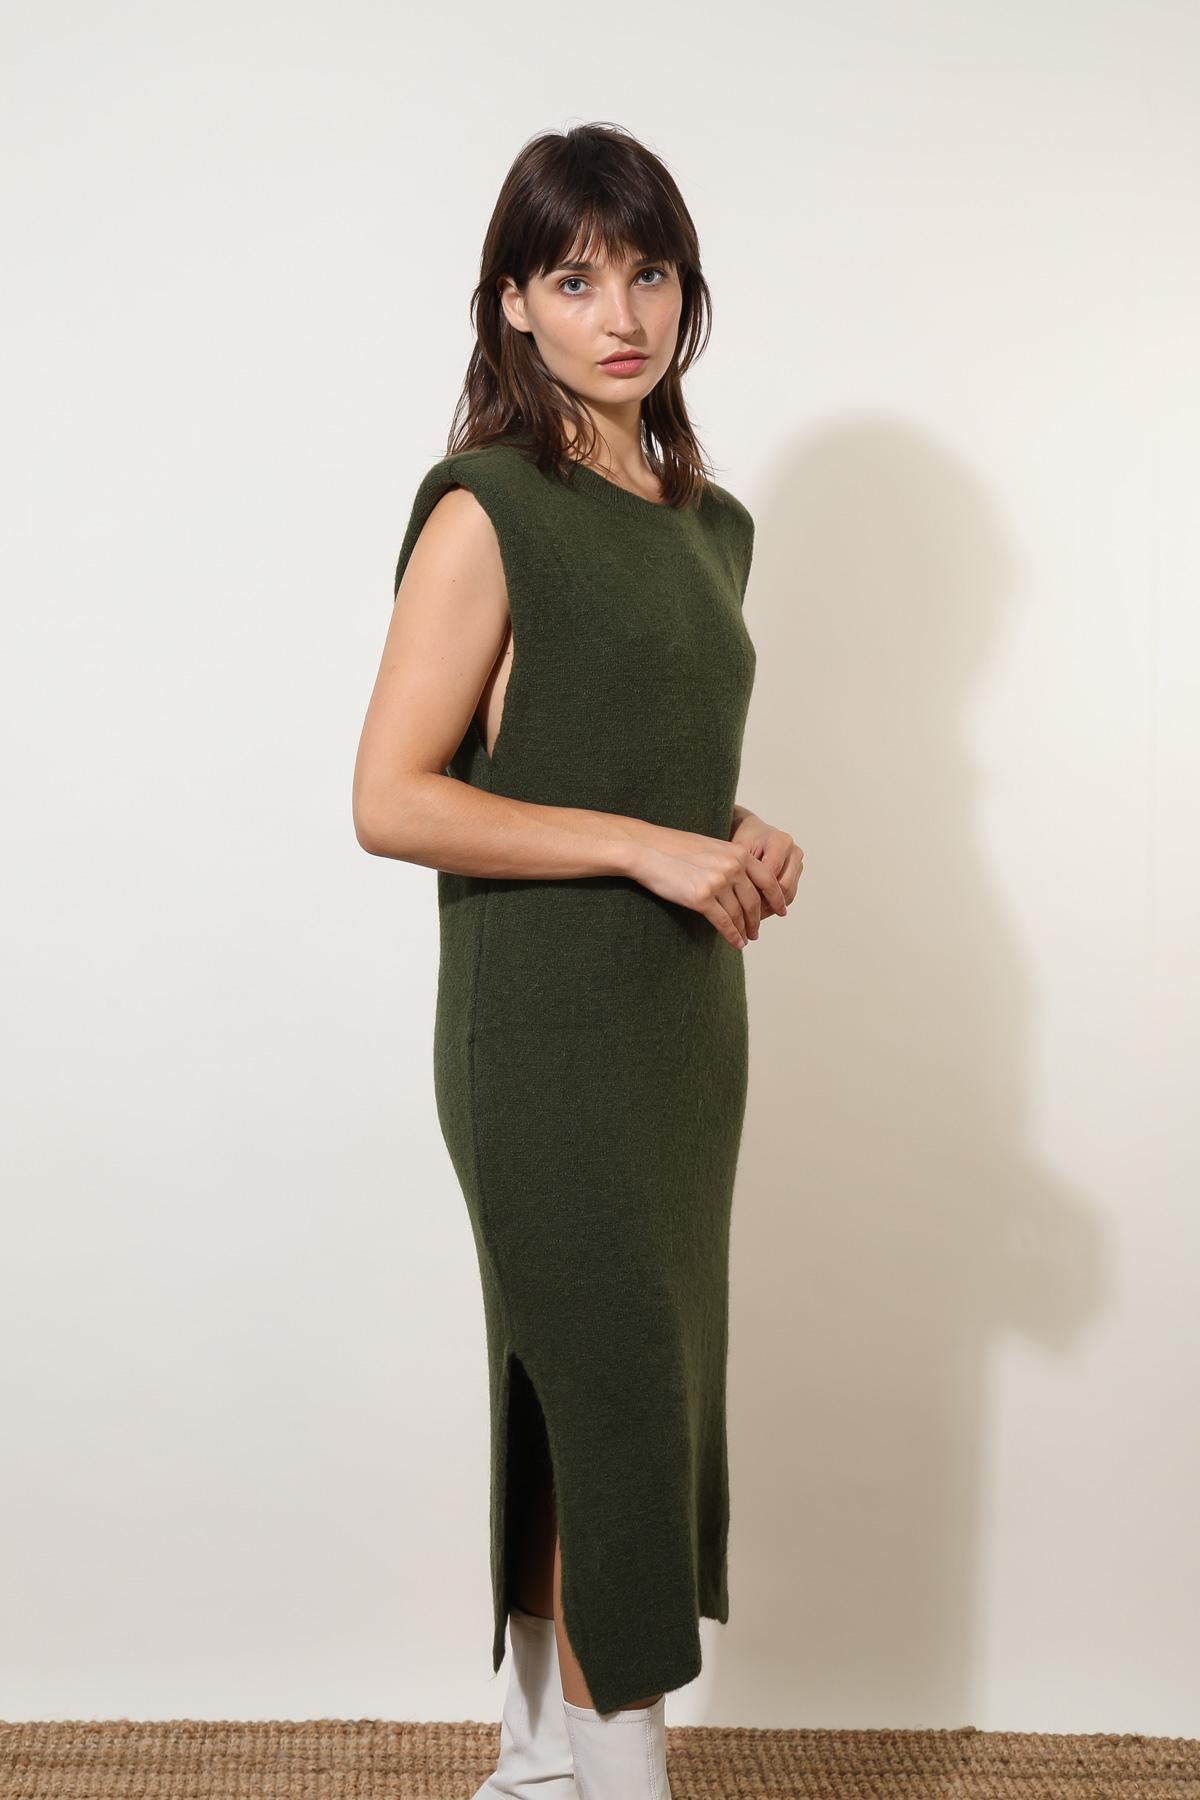 Clever Alice Gia Dress (color options ) - clever alice